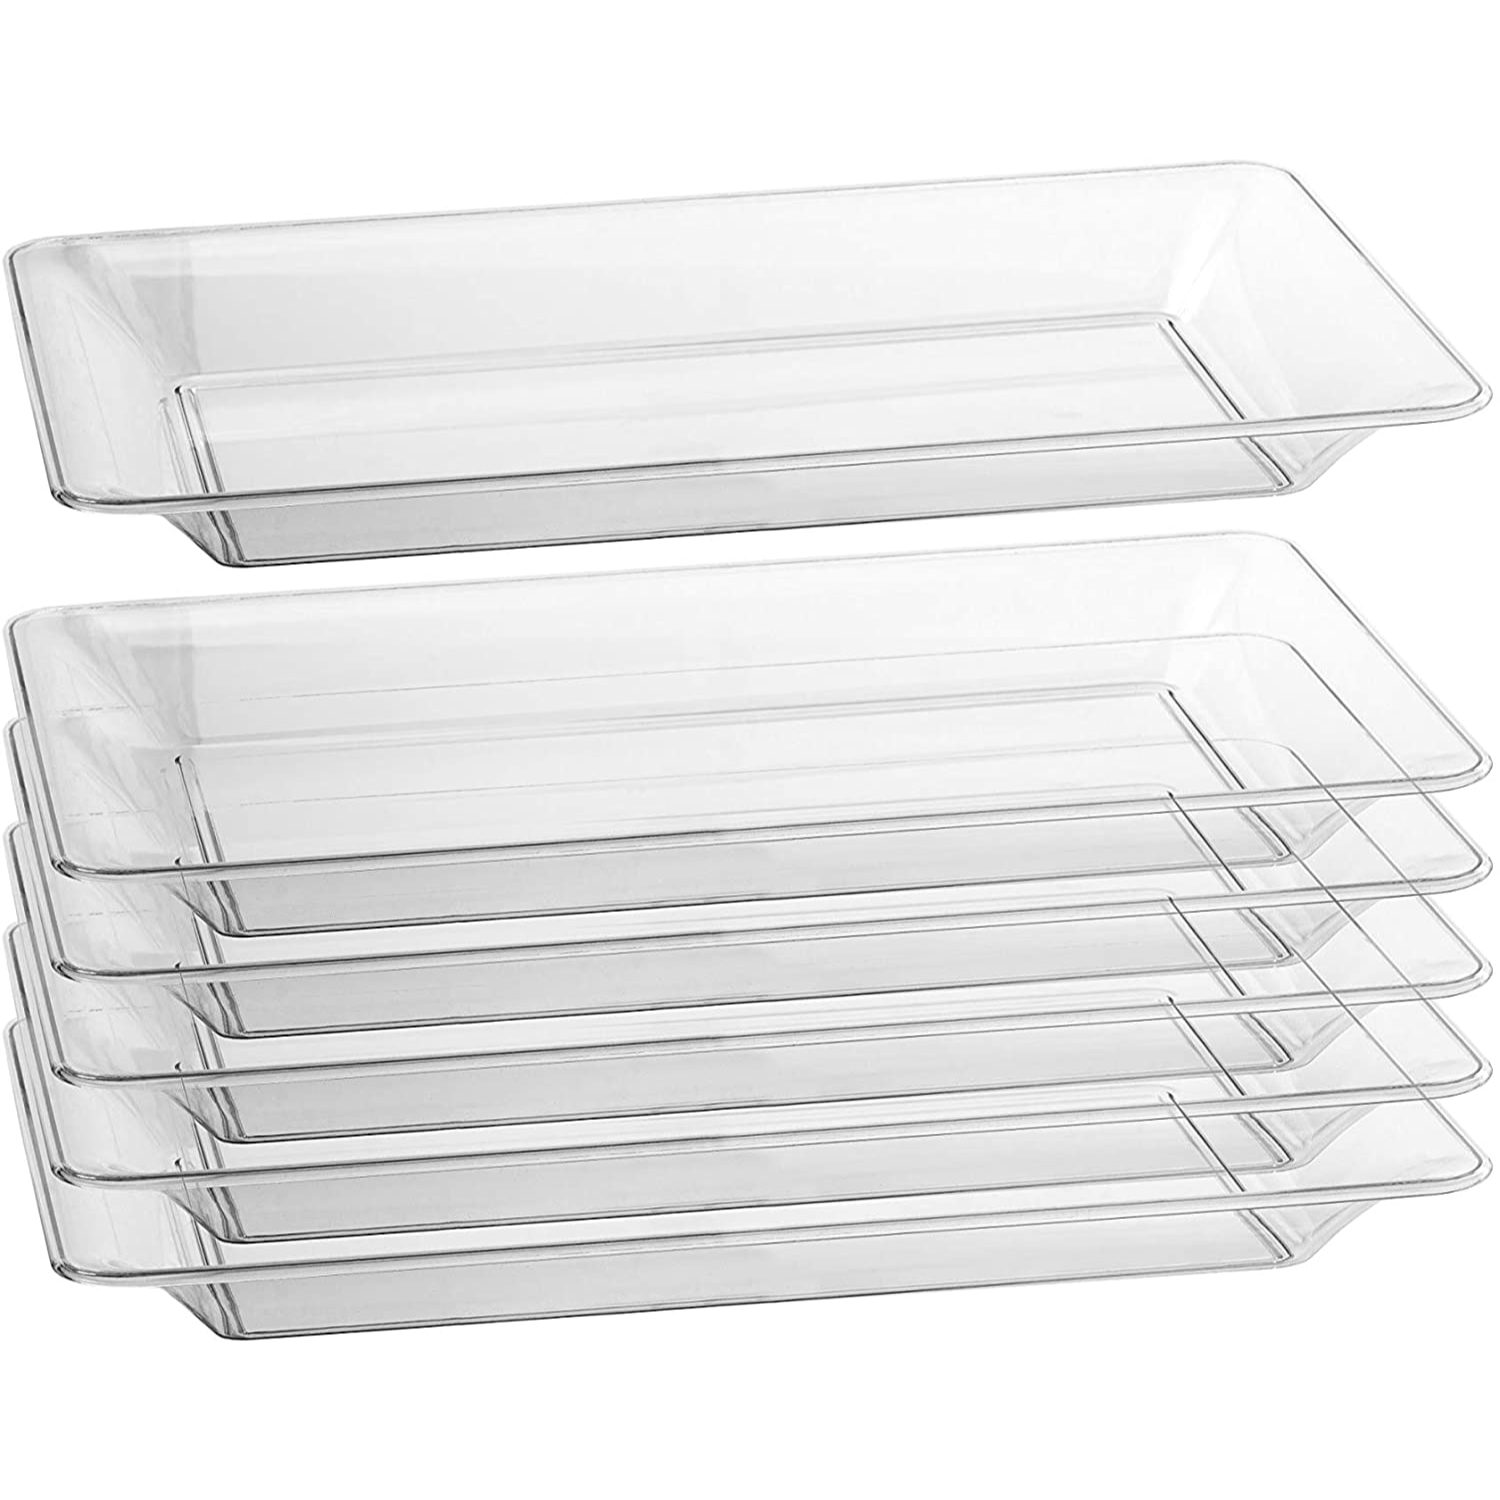 Large Rectangle Crystal Clear Heavy Duty Disposable Serving Tray. 18.25 x  11.25 clear plastic serving platters.